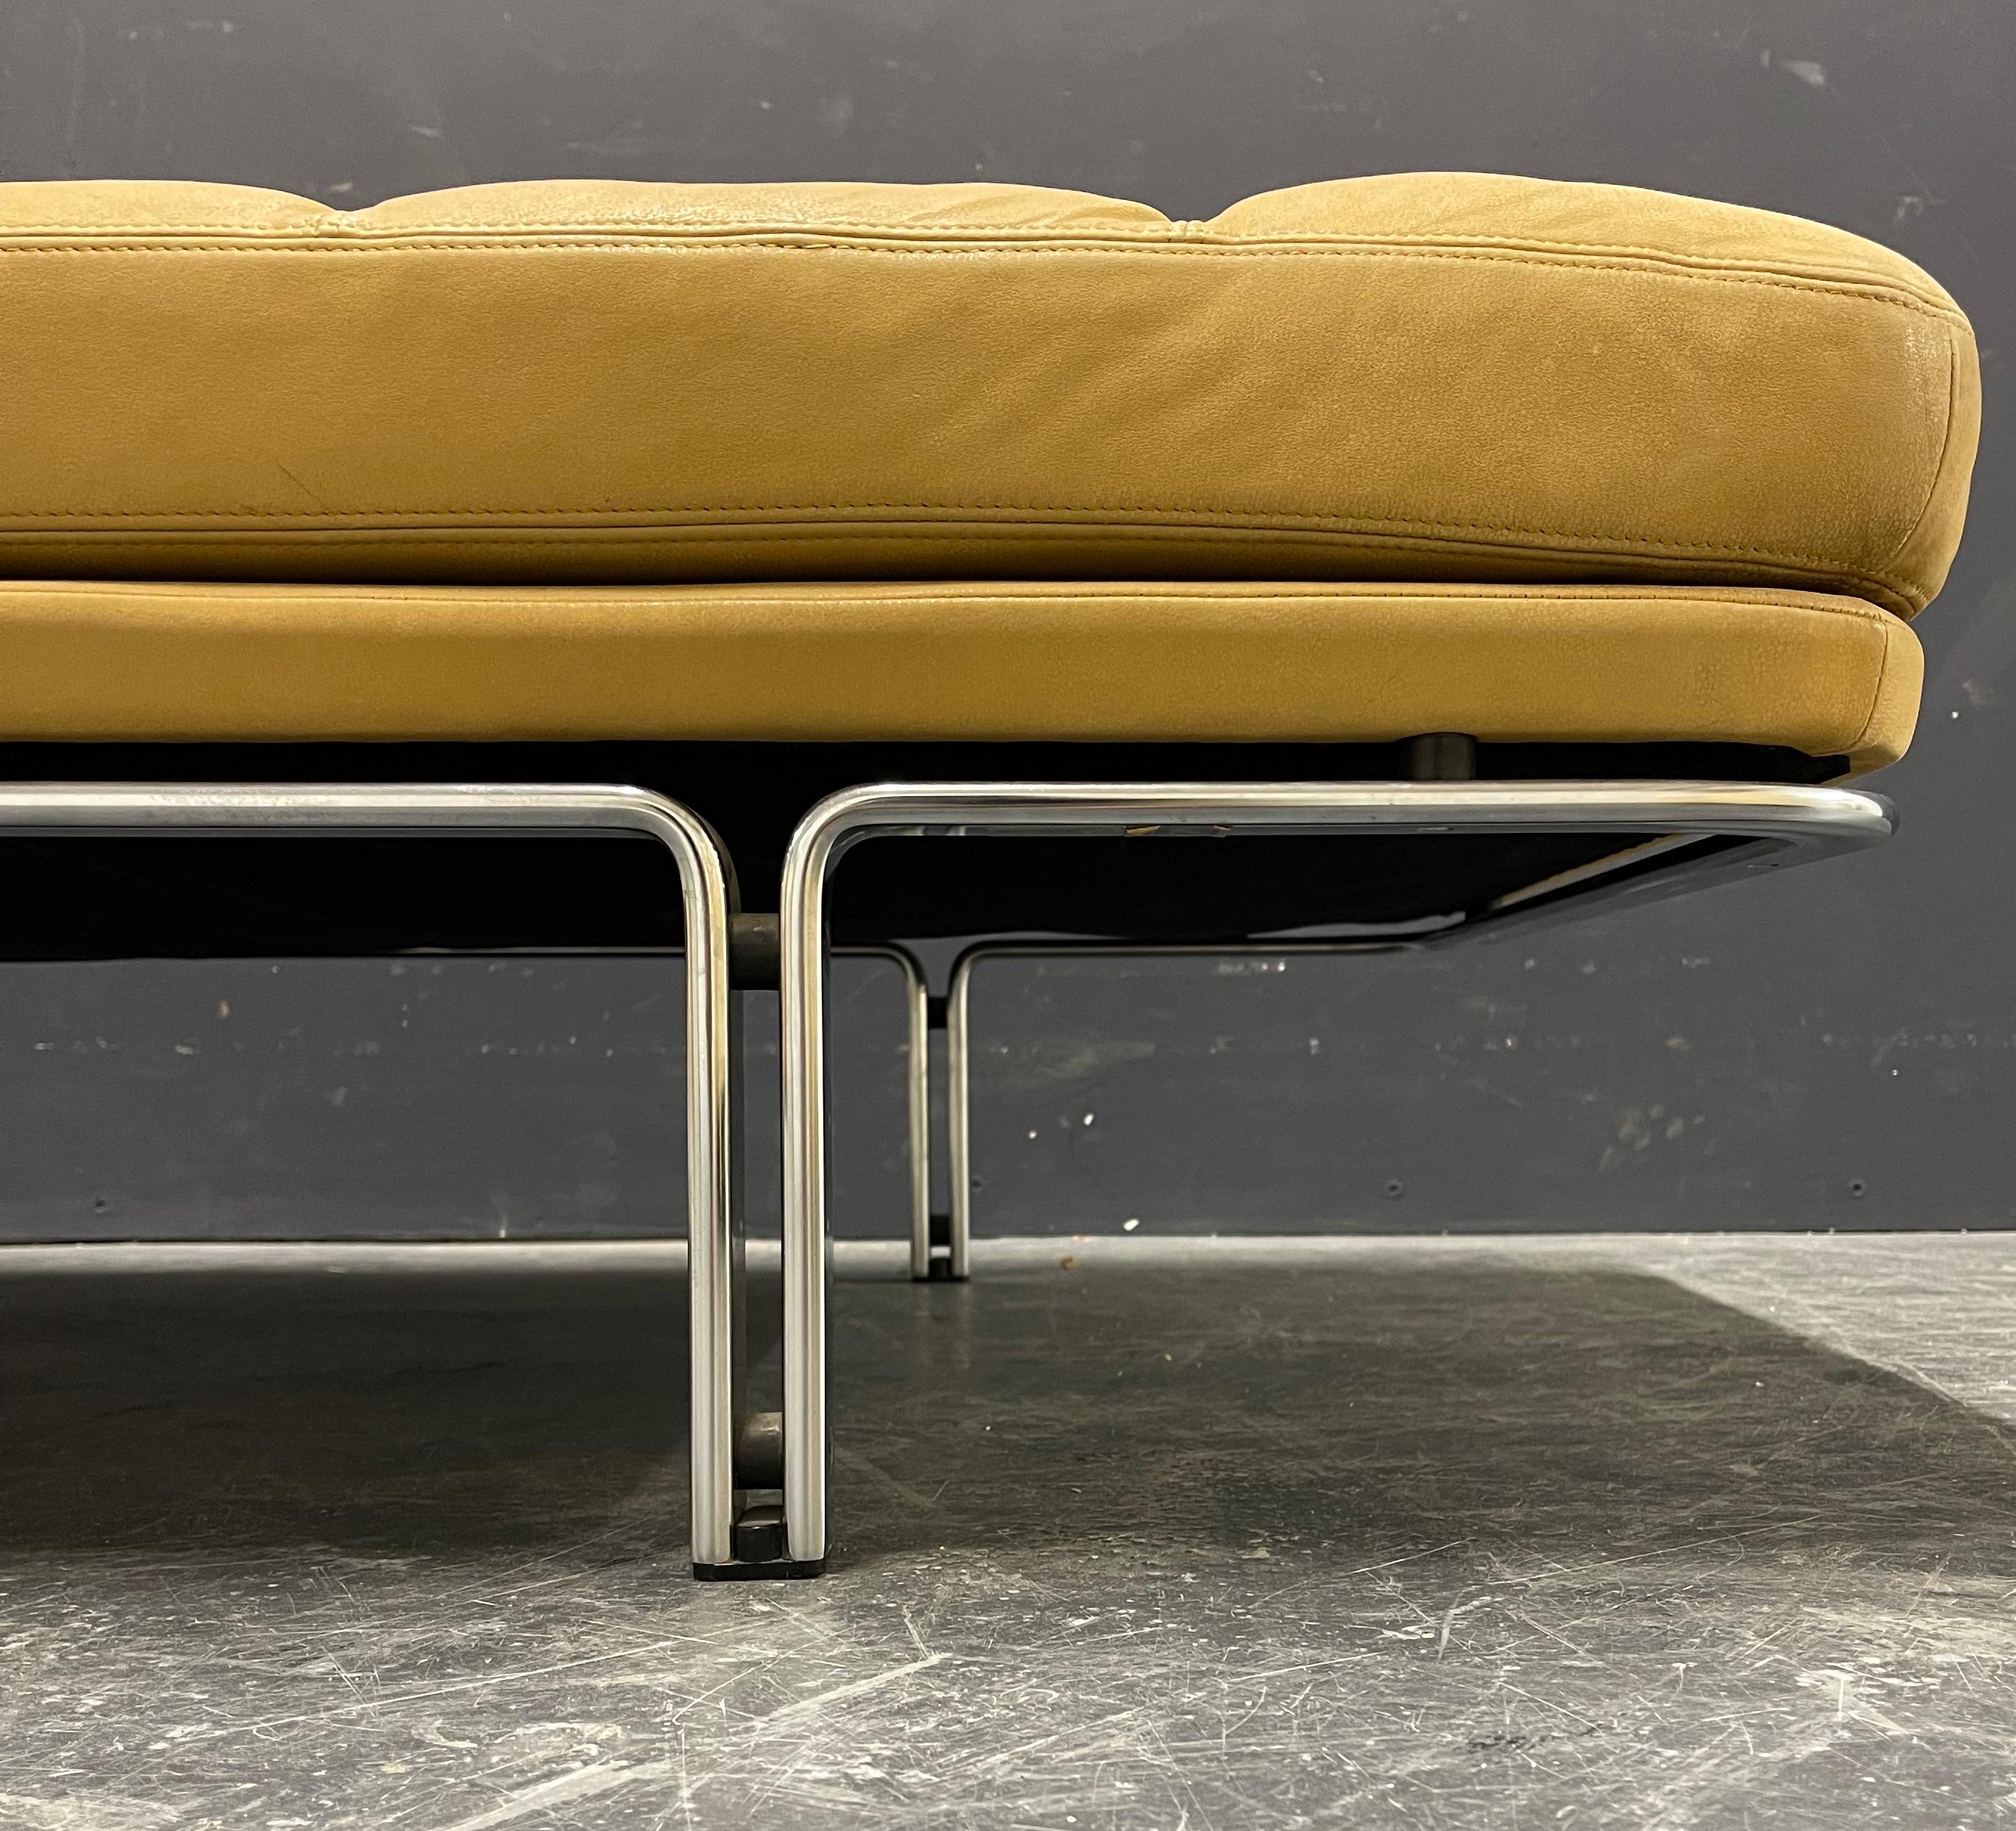 Wonderful No. 6915 daybed by Horst Bruning - produced by Kill International. The steel frame provides a stunning contrast with the comfortable natural brown leather mattress, which is till completely original showing an elegant patina to the